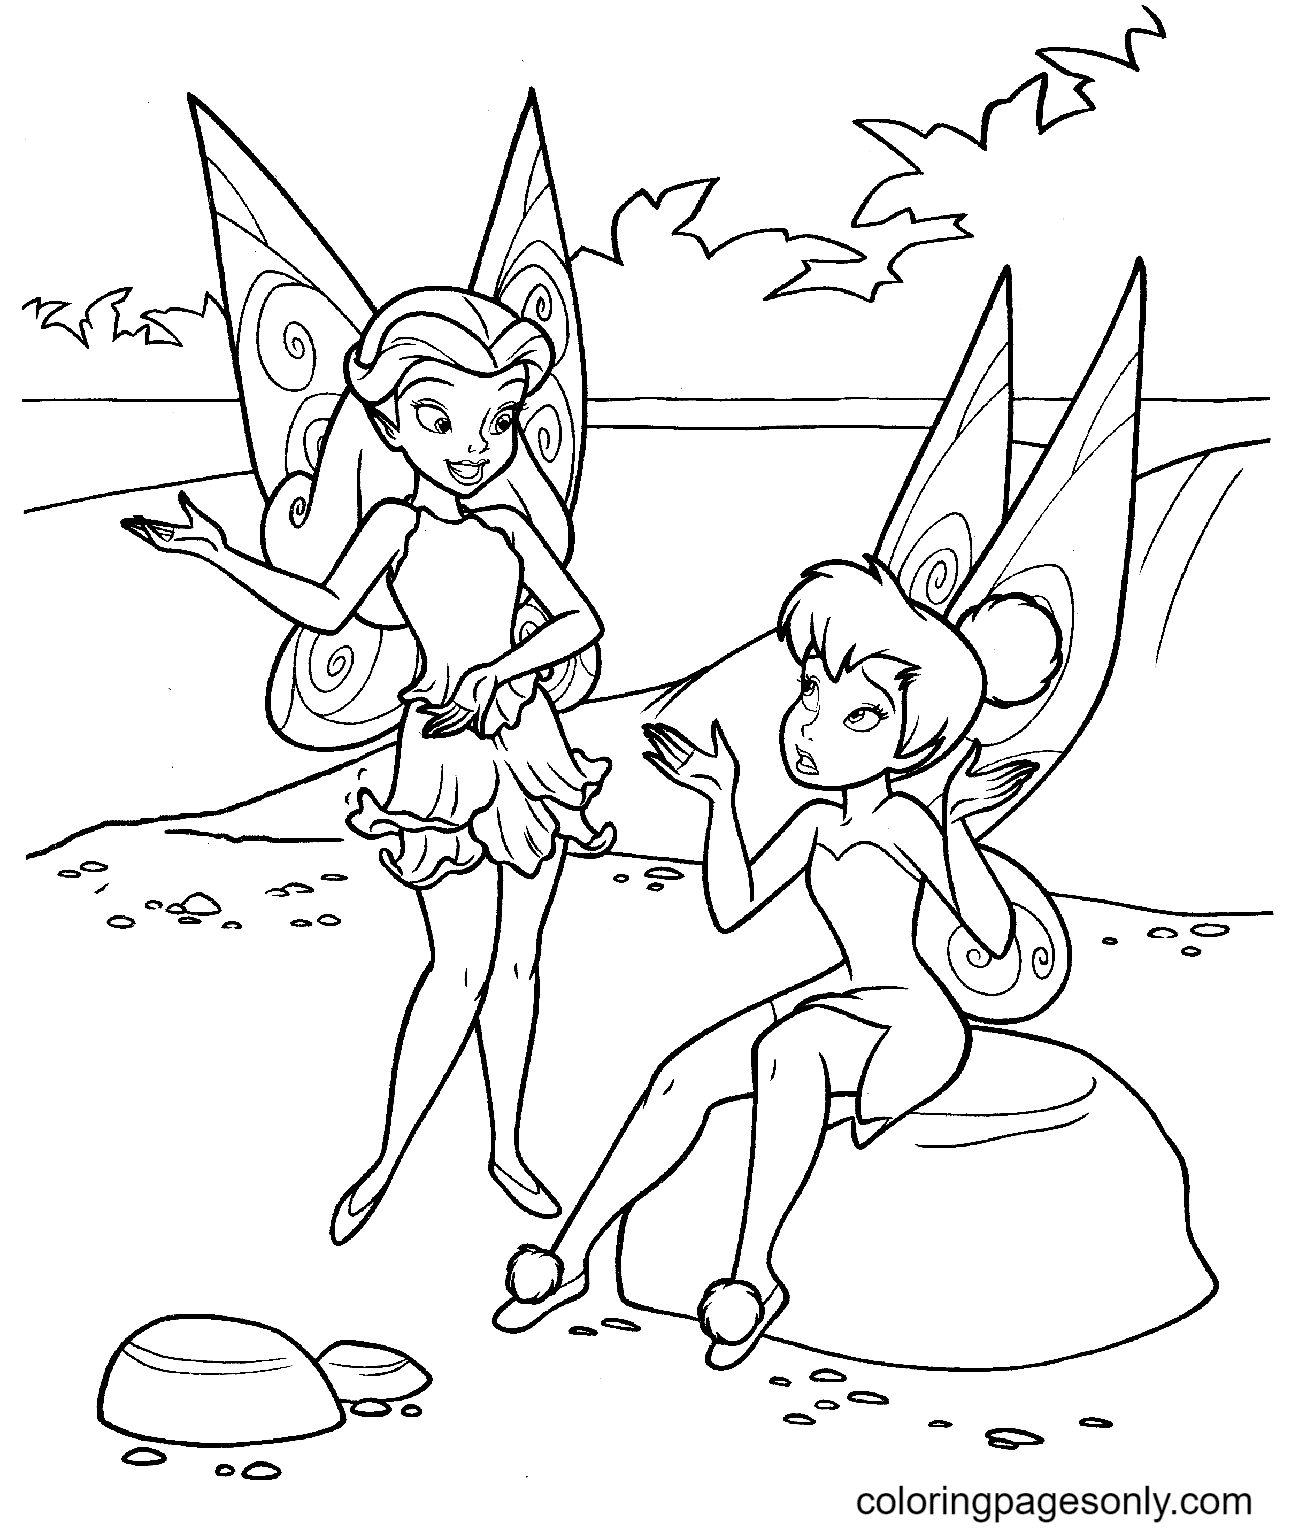 Tinkerbell And Rosetta Coloring Page